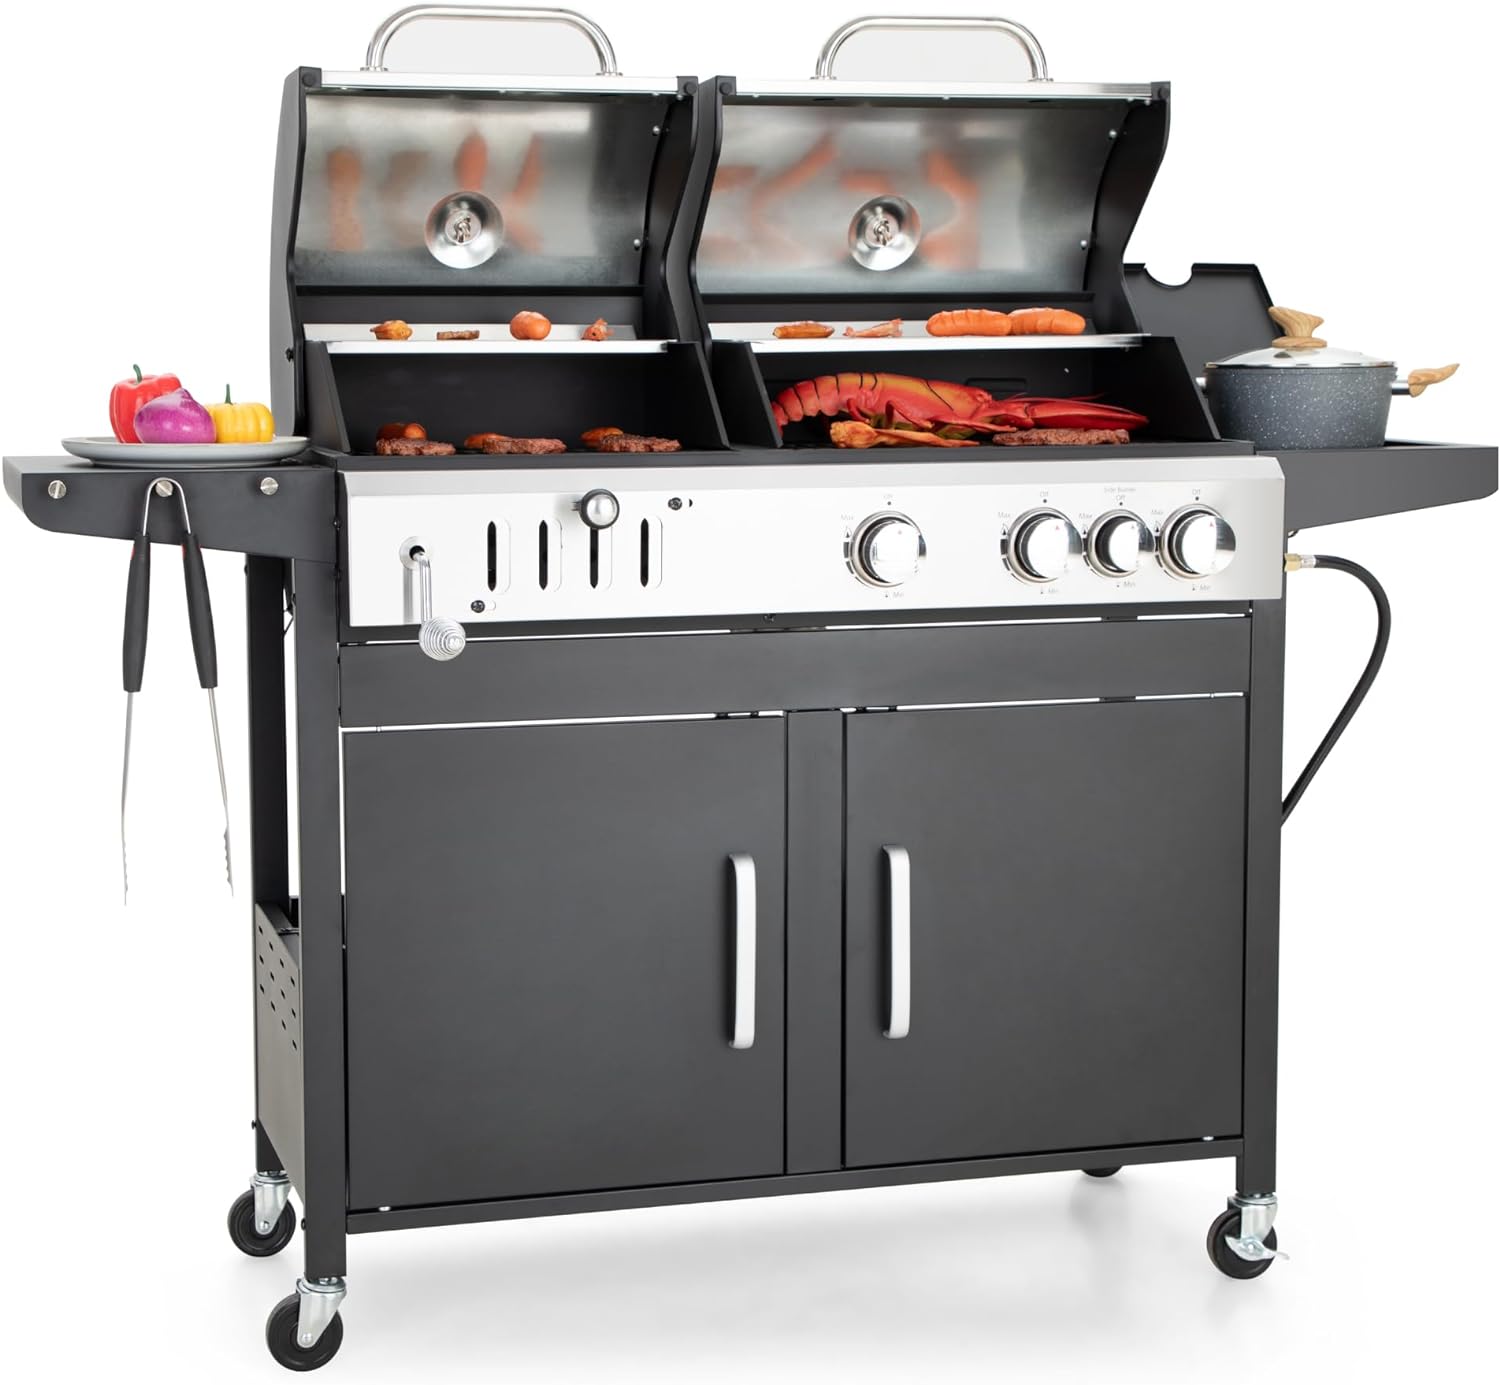 Captiva Designs Propane Gas Grill and Charcoal Grill Combo